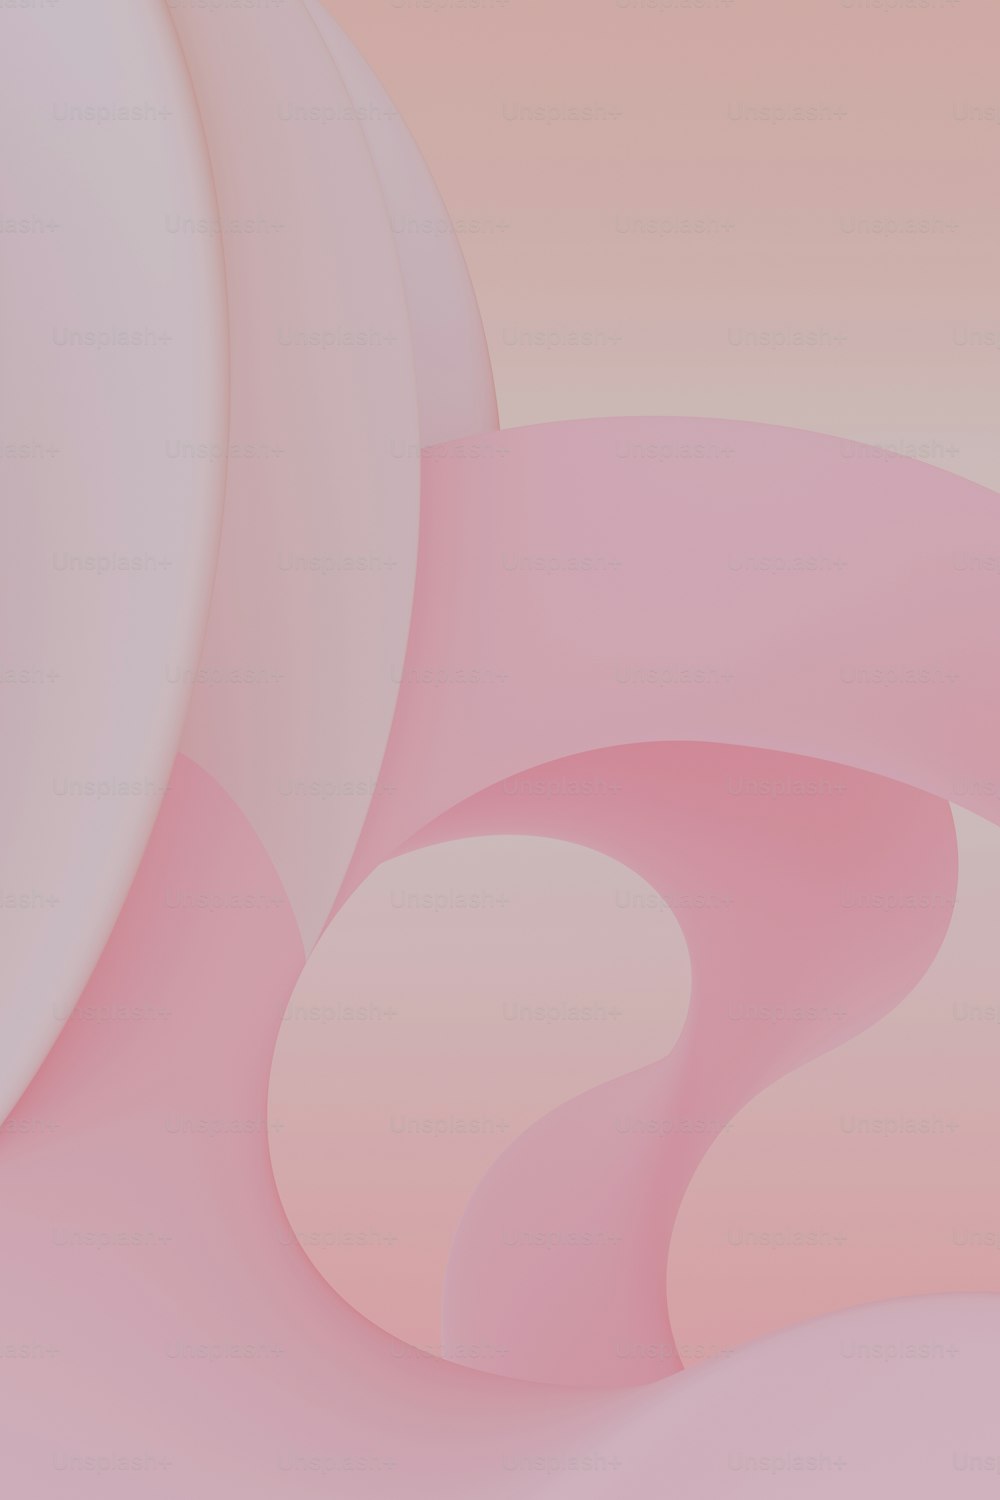 a pink and white abstract background with curved shapes